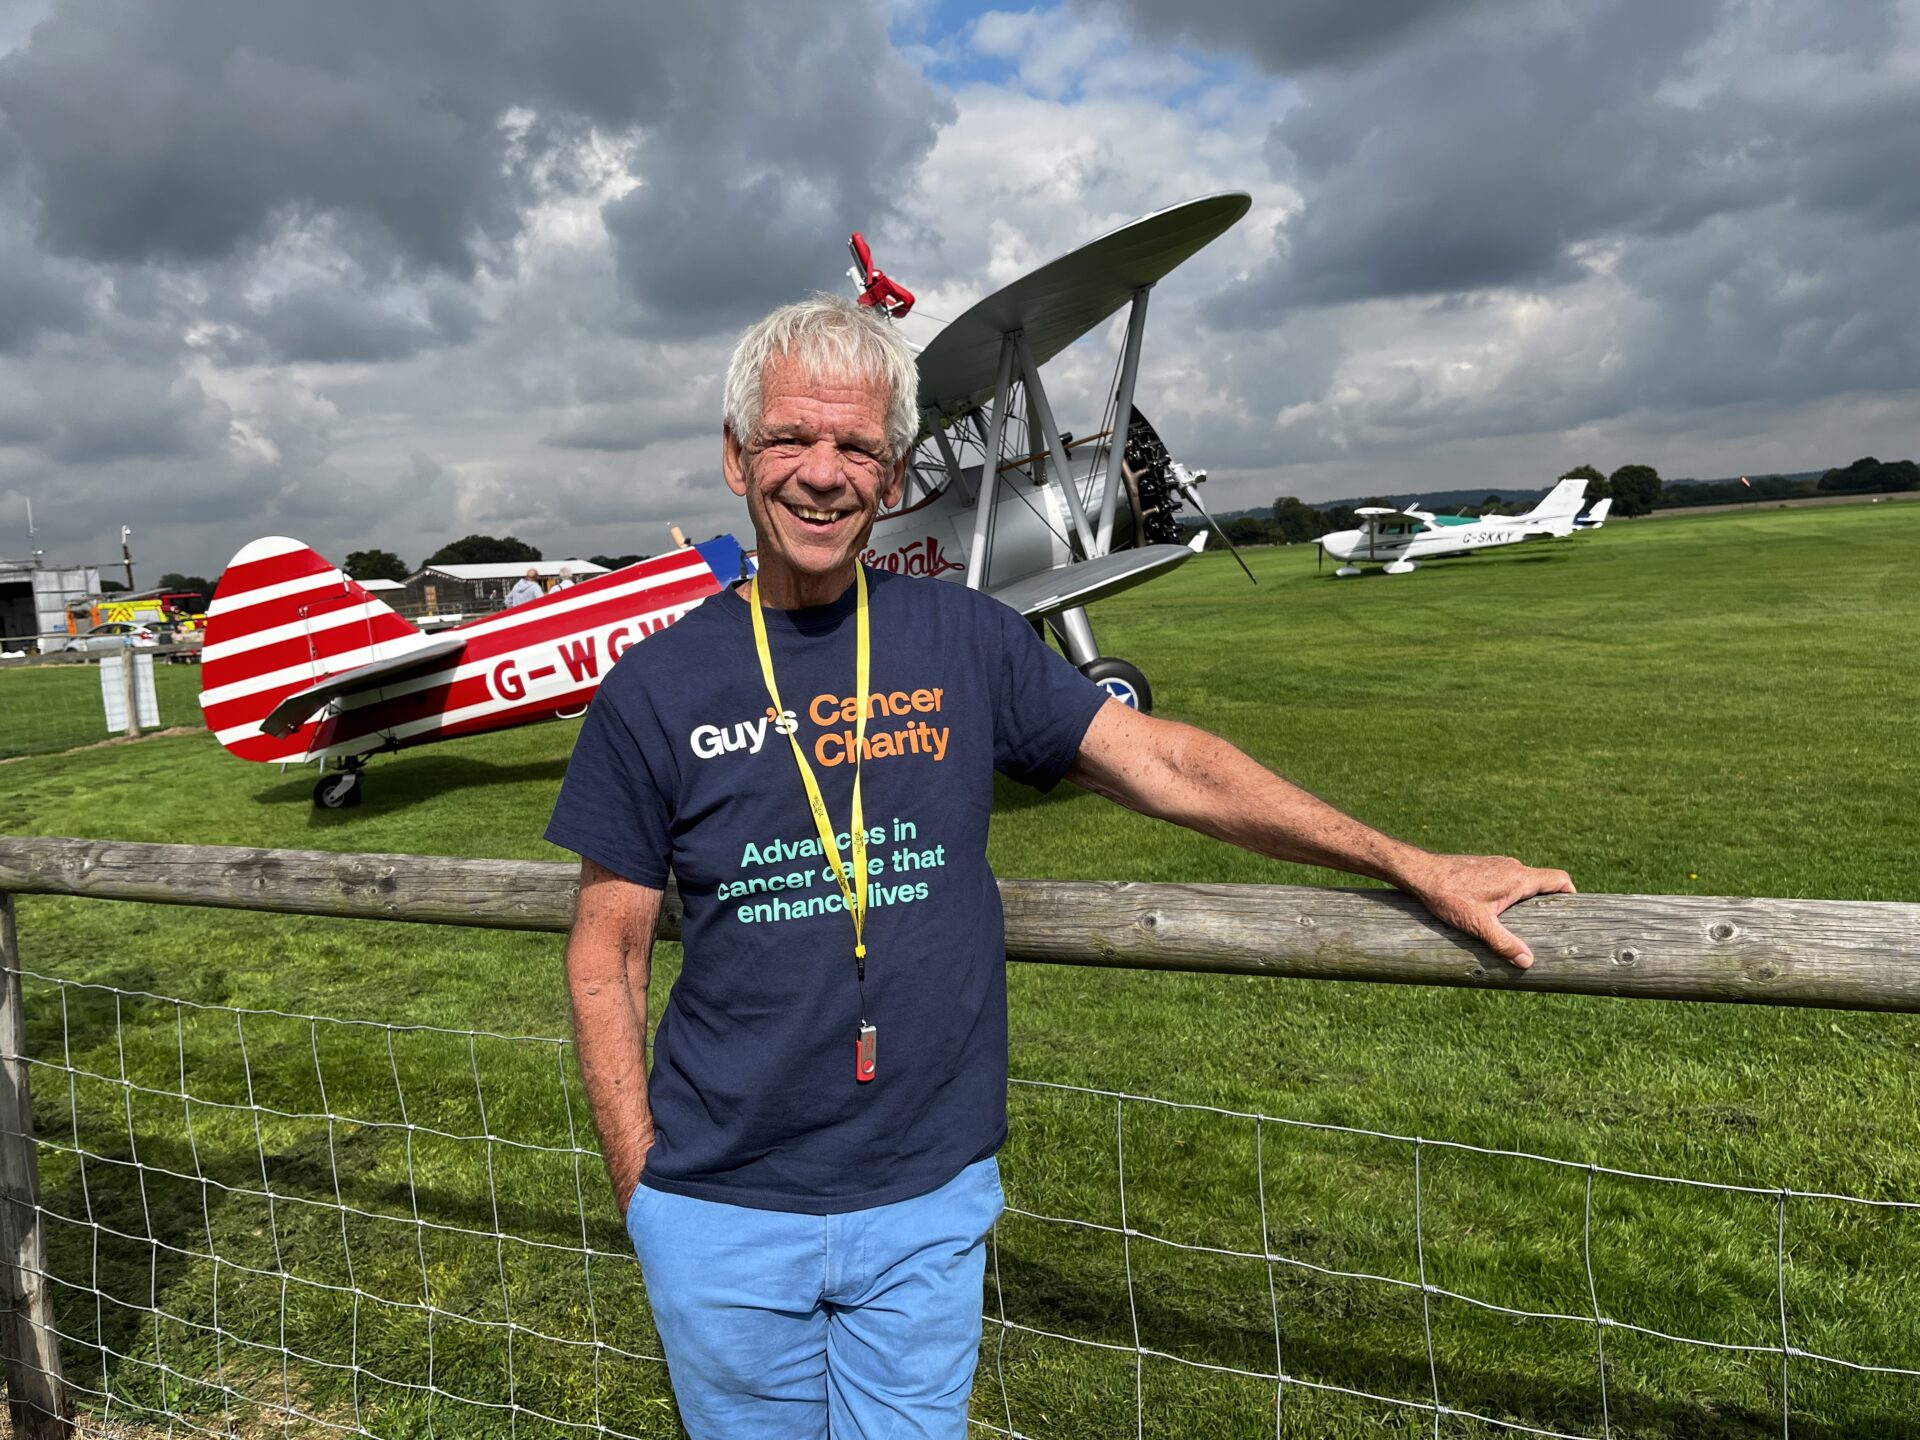 Image of Geoff after completing the Wingwalk, next to the plane